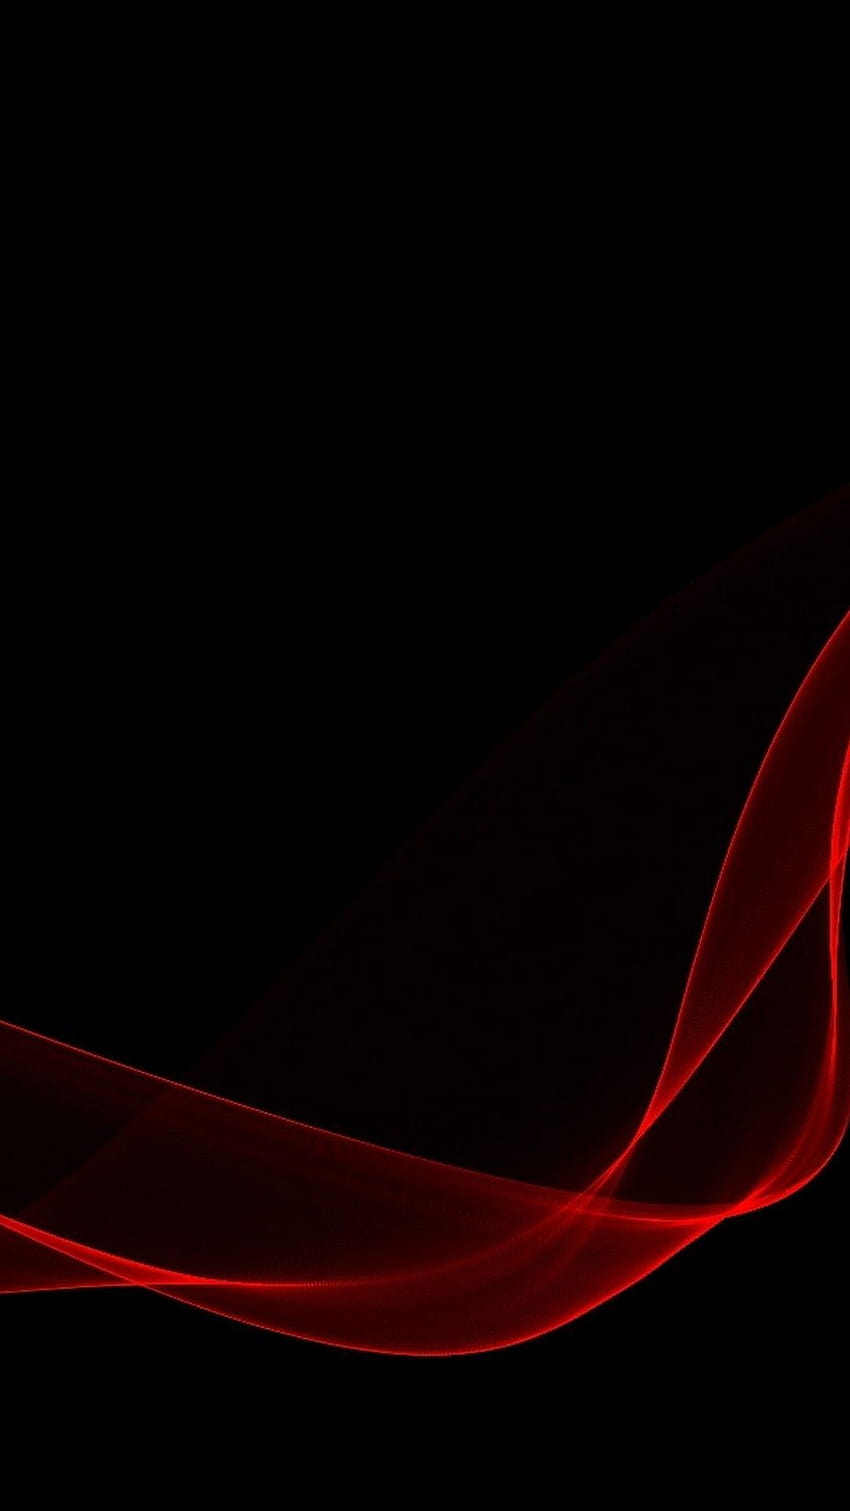 Cool Android, dark red full android HD phone wallpaper